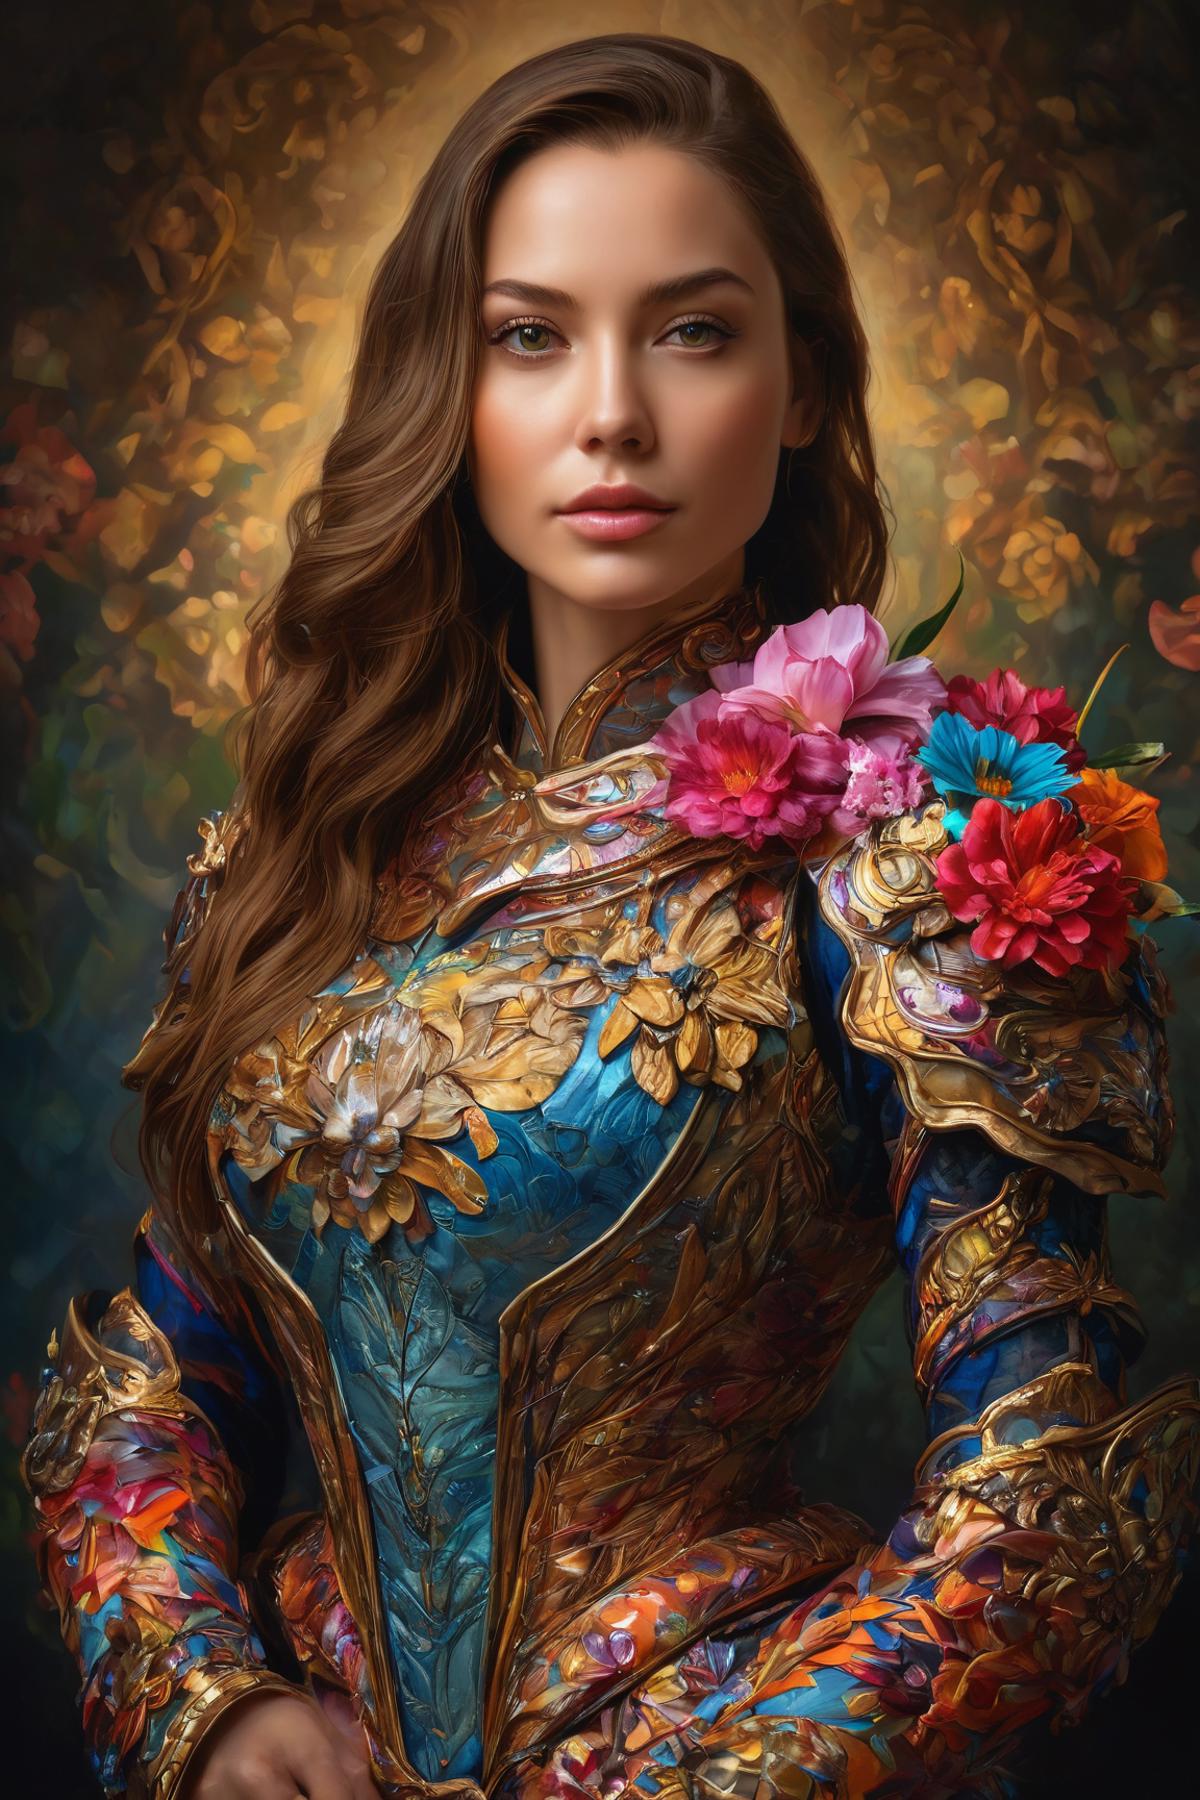 A beautiful woman with long hair wearing a blue and gold dress and surrounded by flowers.